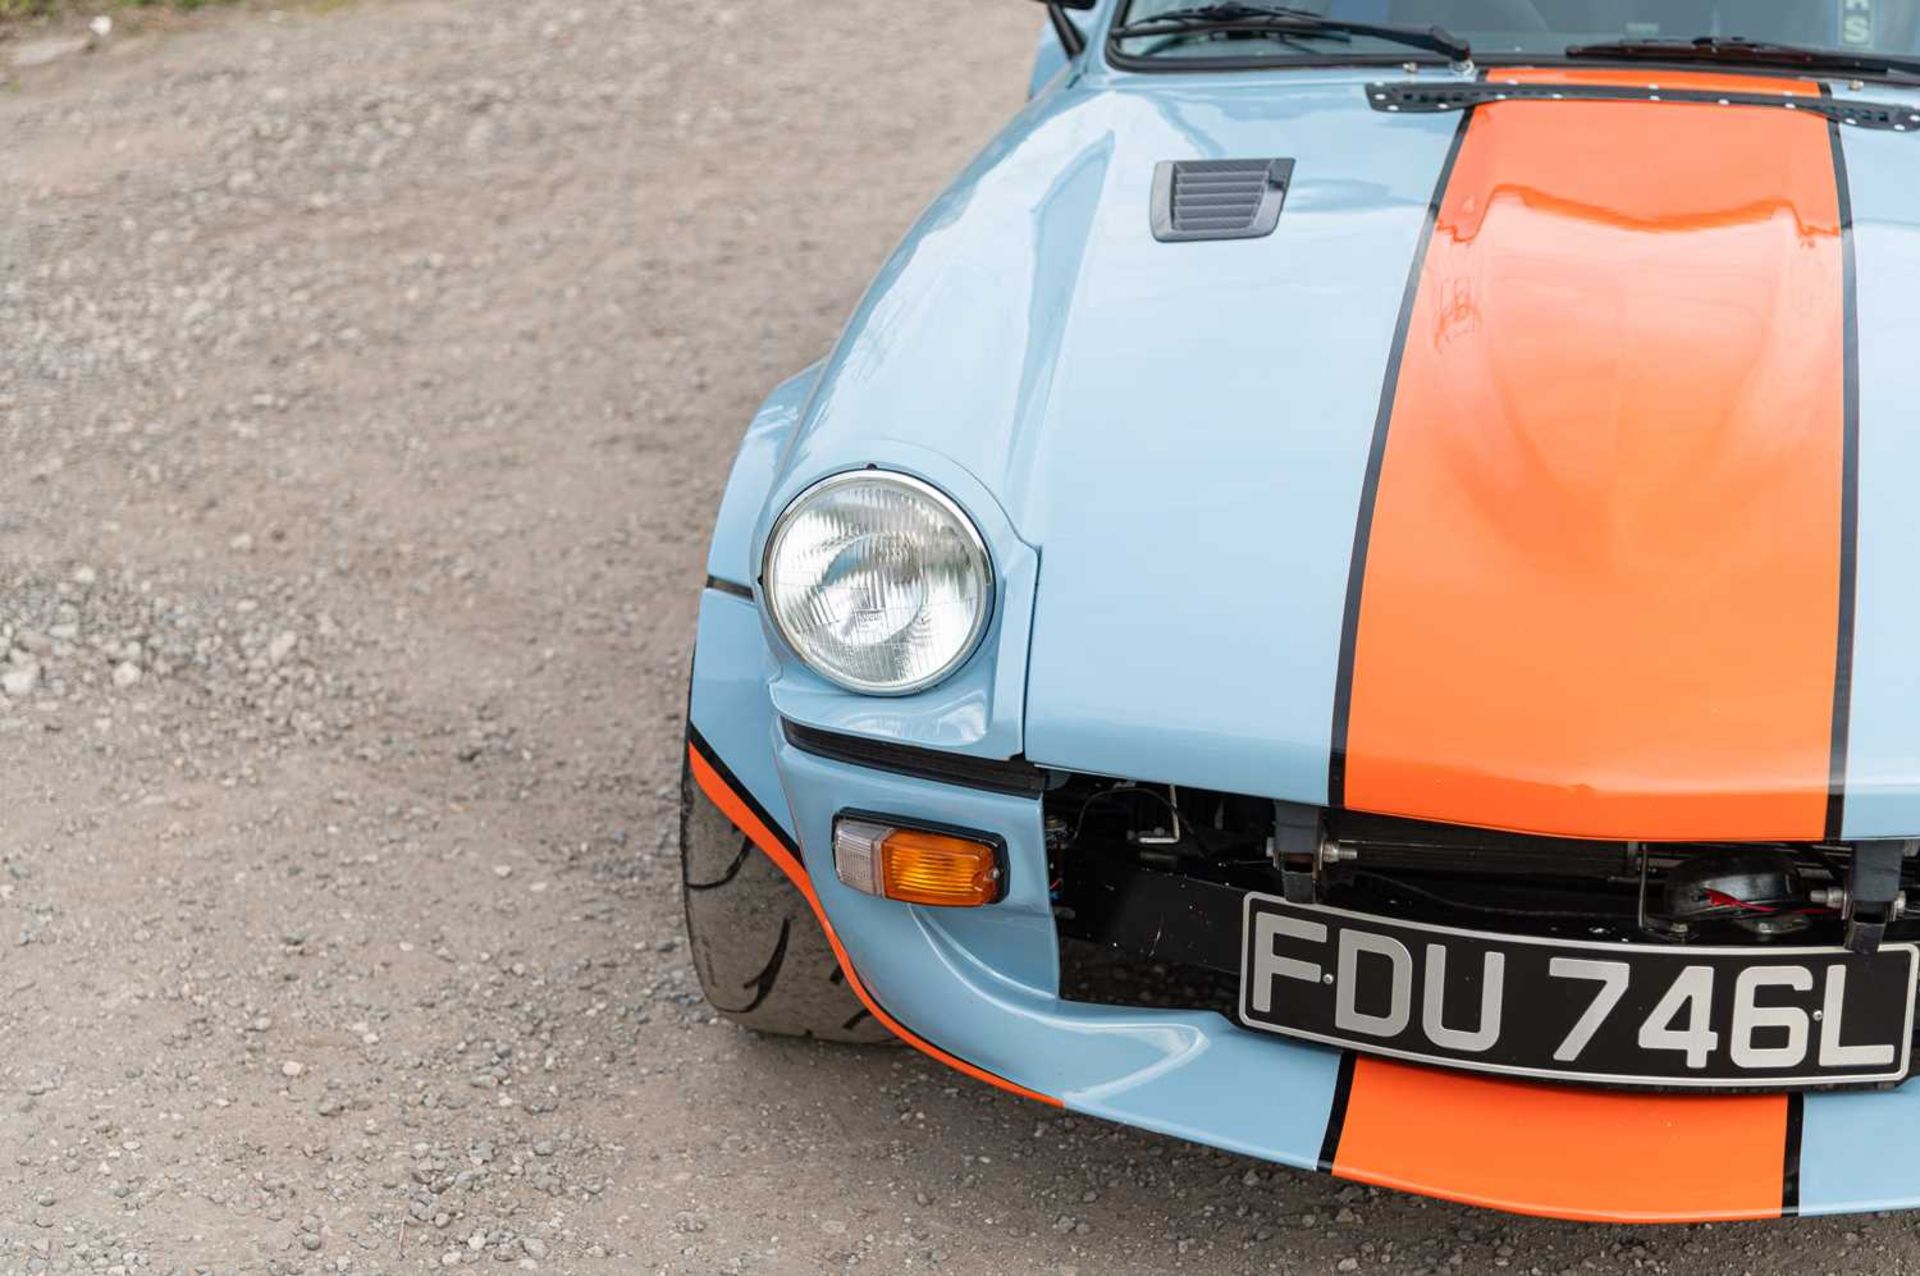 1973 Triumph GT6  ***NO RESERVE*** Presented in Gulf Racing-inspired paintwork, road-going track wea - Bild 30 aus 65